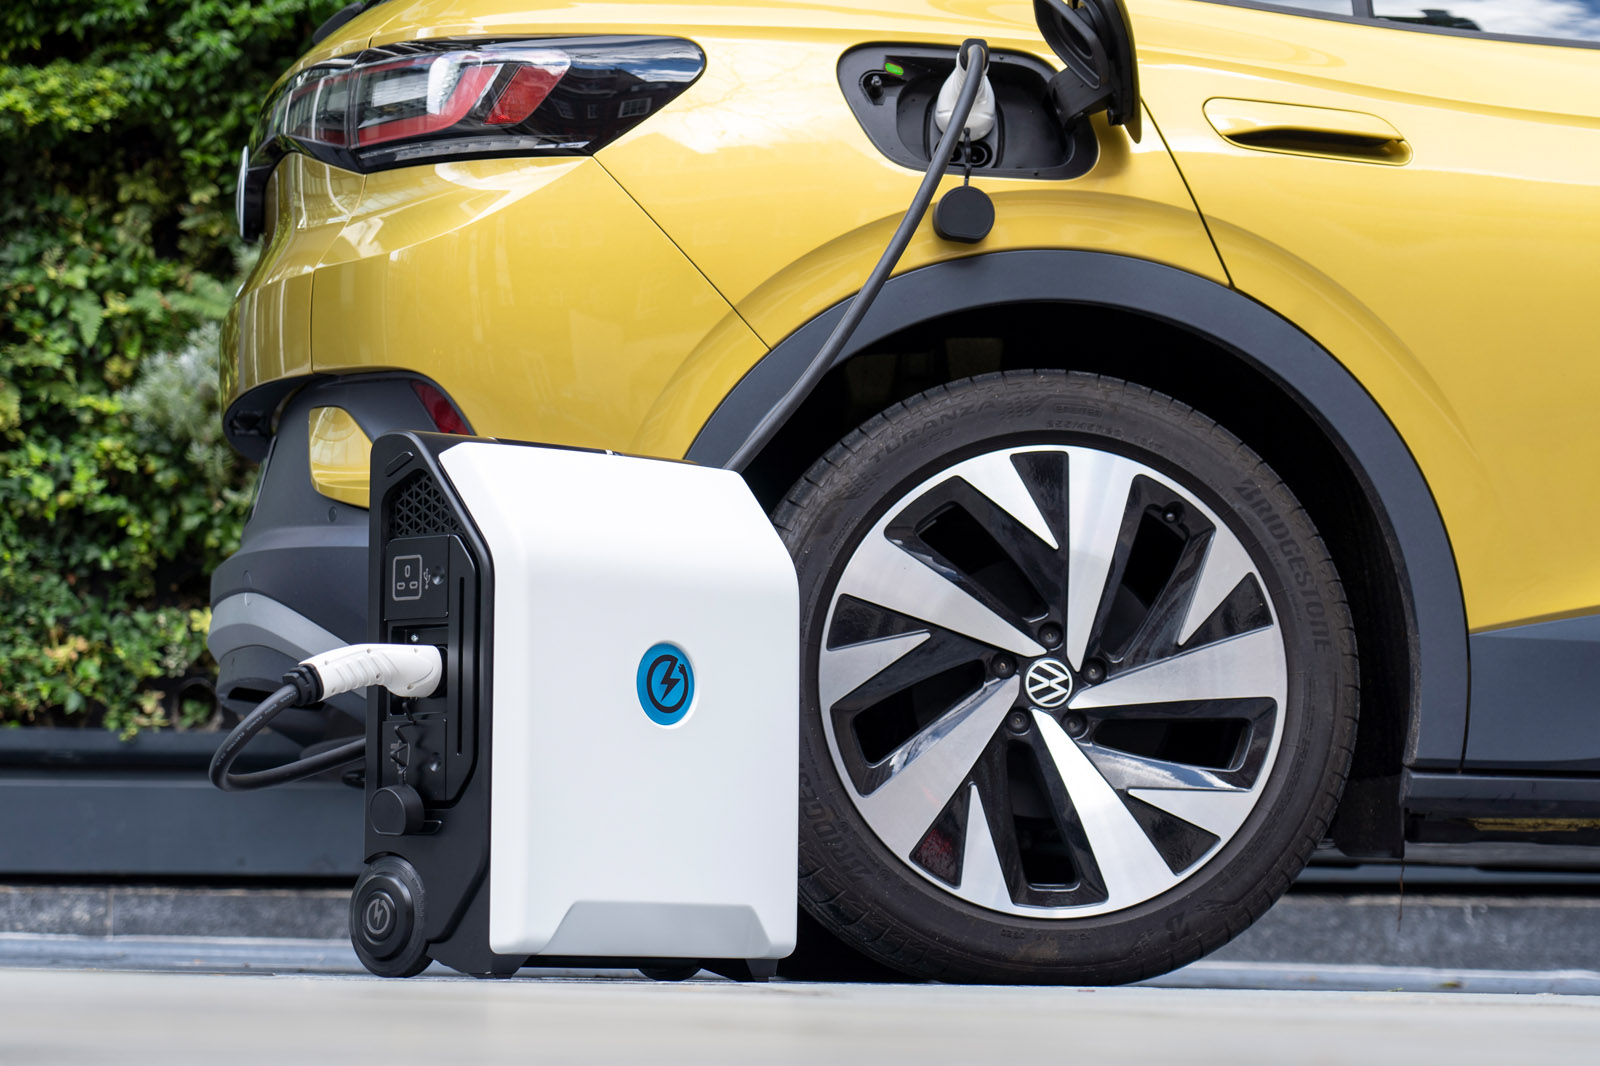 UK firm launches portable EV charger for urban drivers Autocar